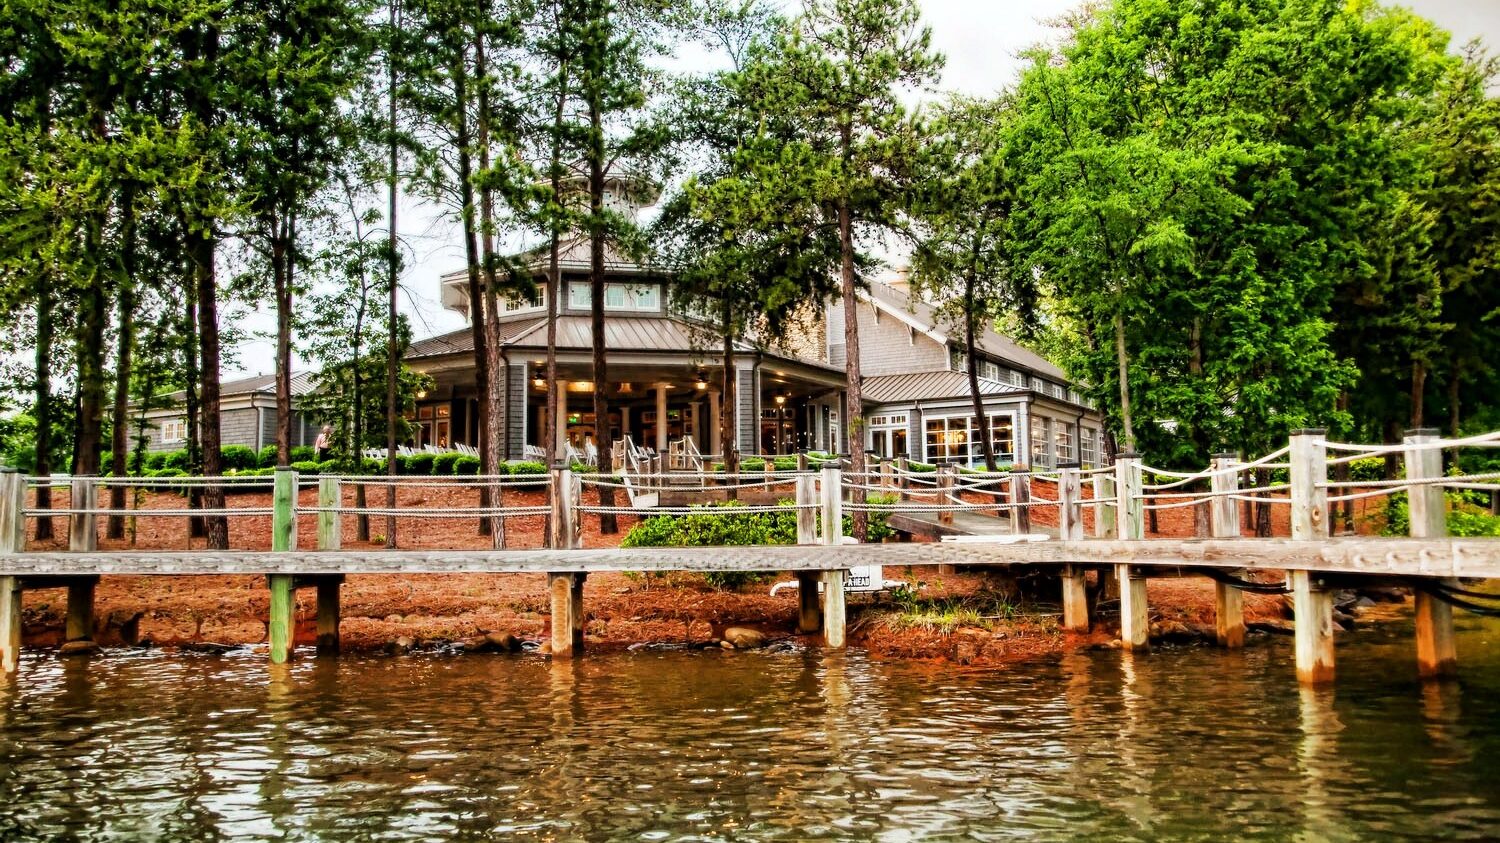 The Lake Club at The Point in Mooresville, North Carolina